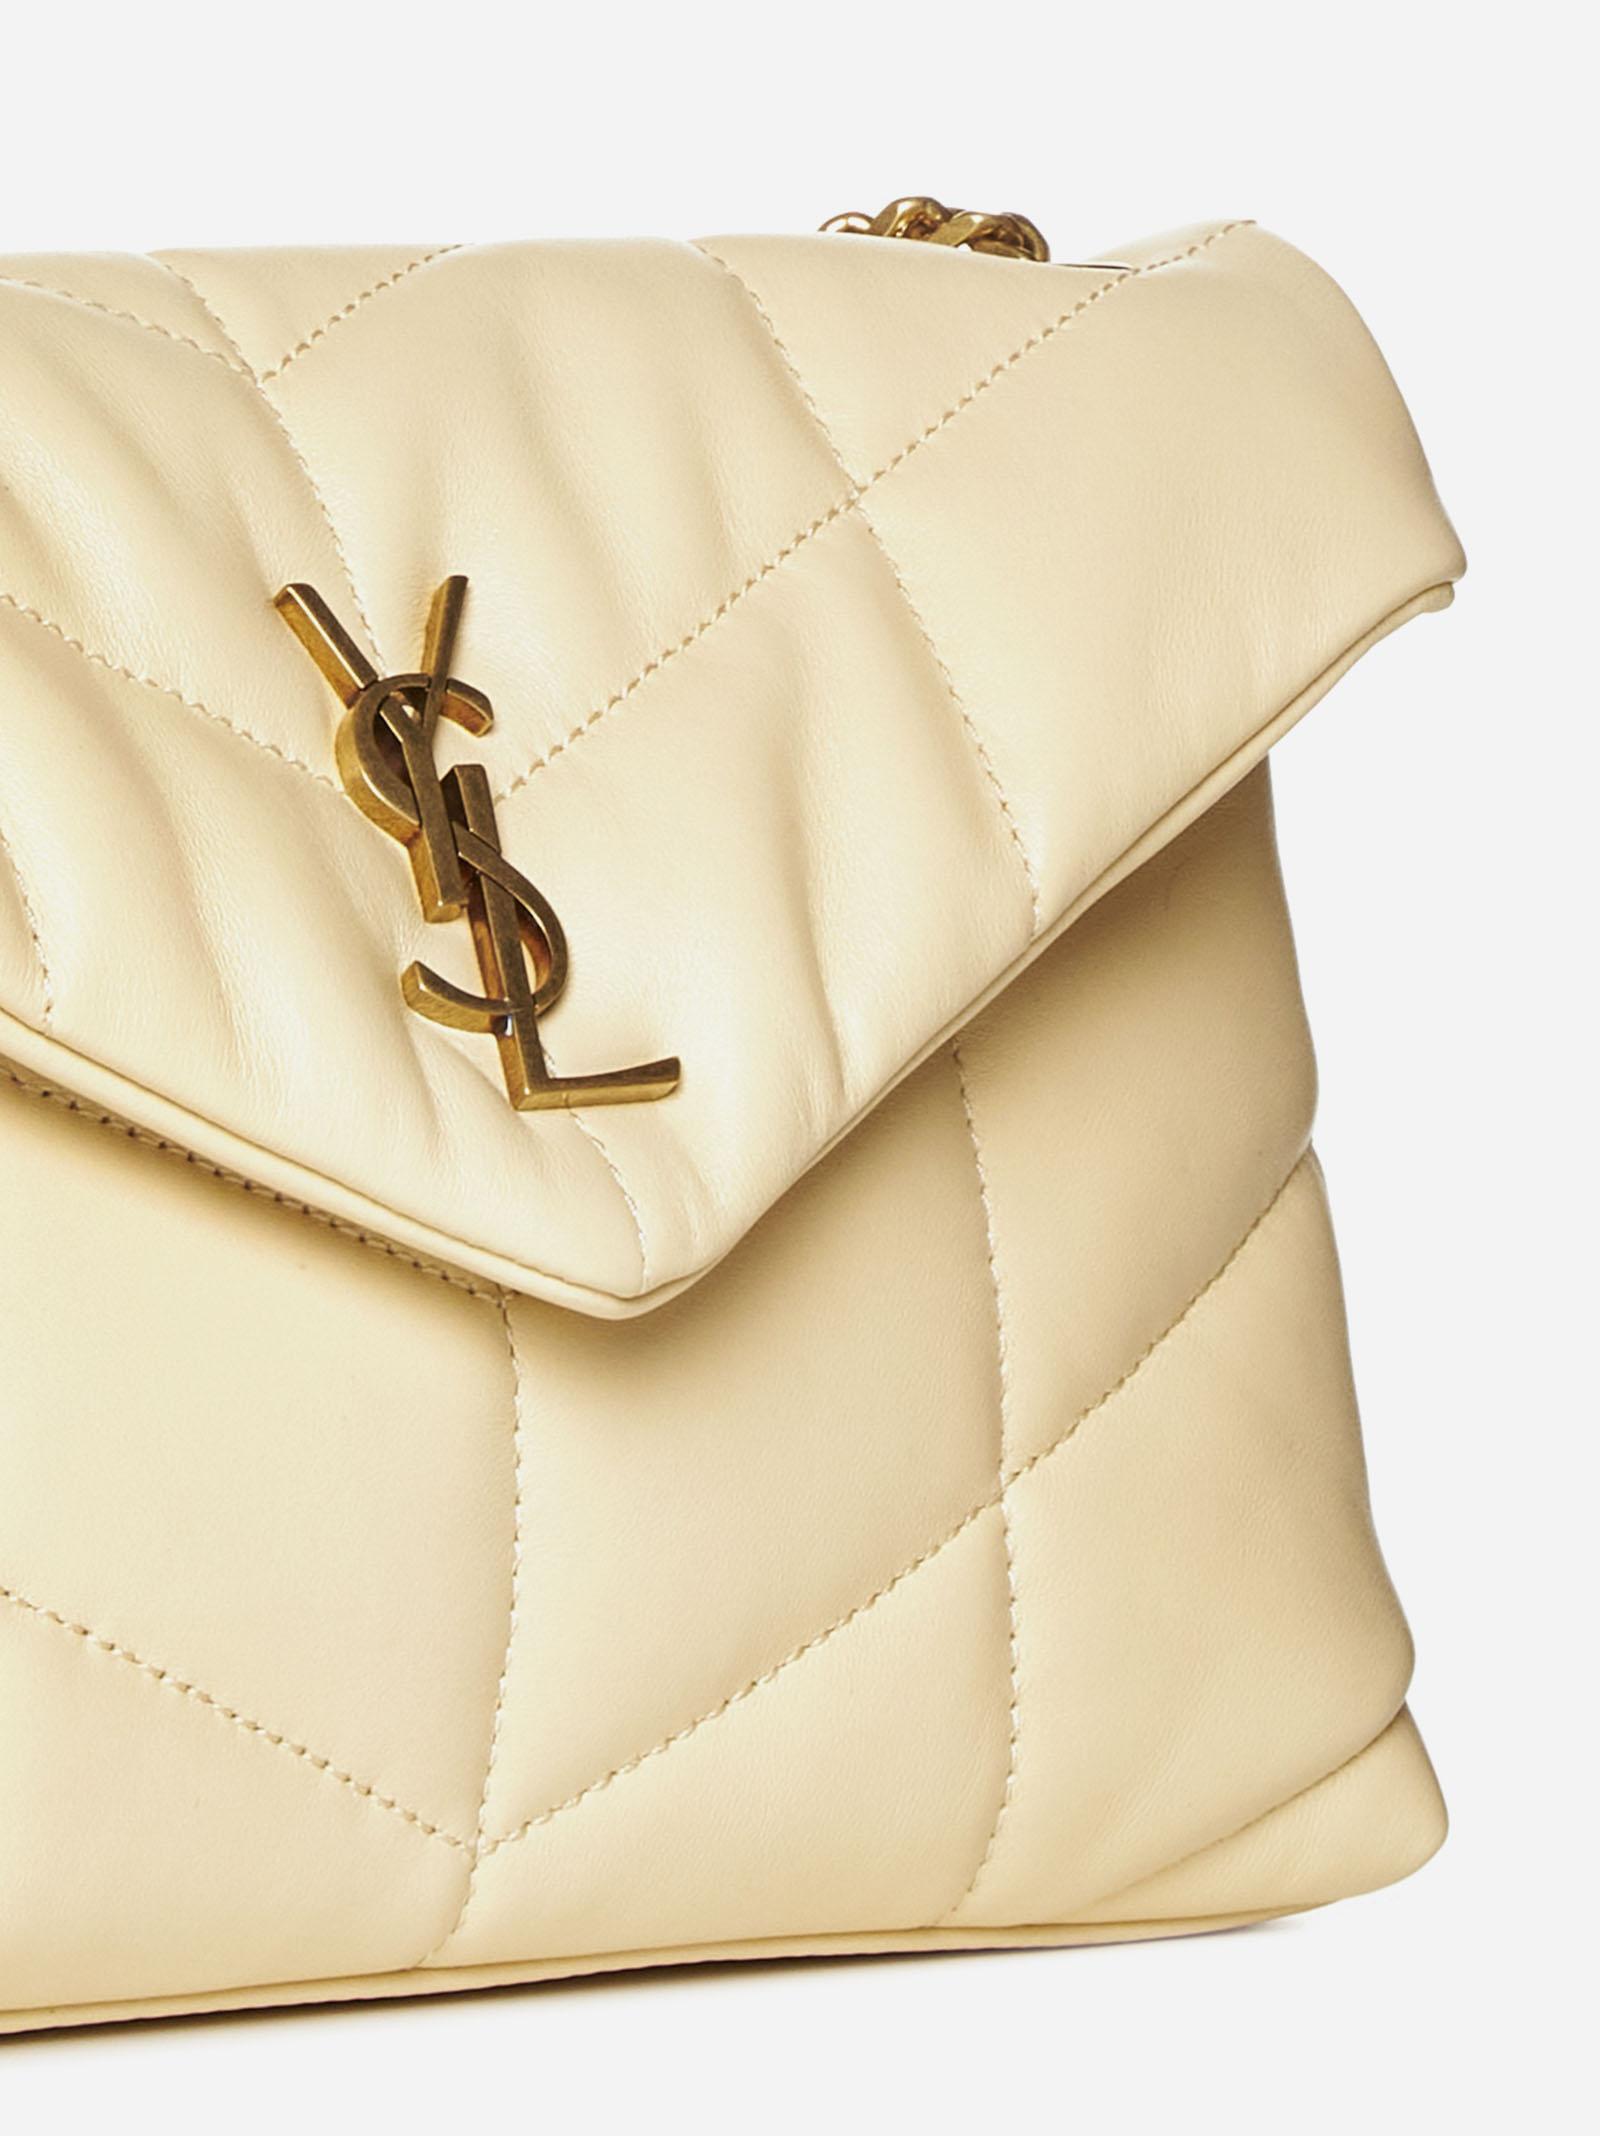 SAINT LAURENT: Puffer Toy quilted leather bag - Beige